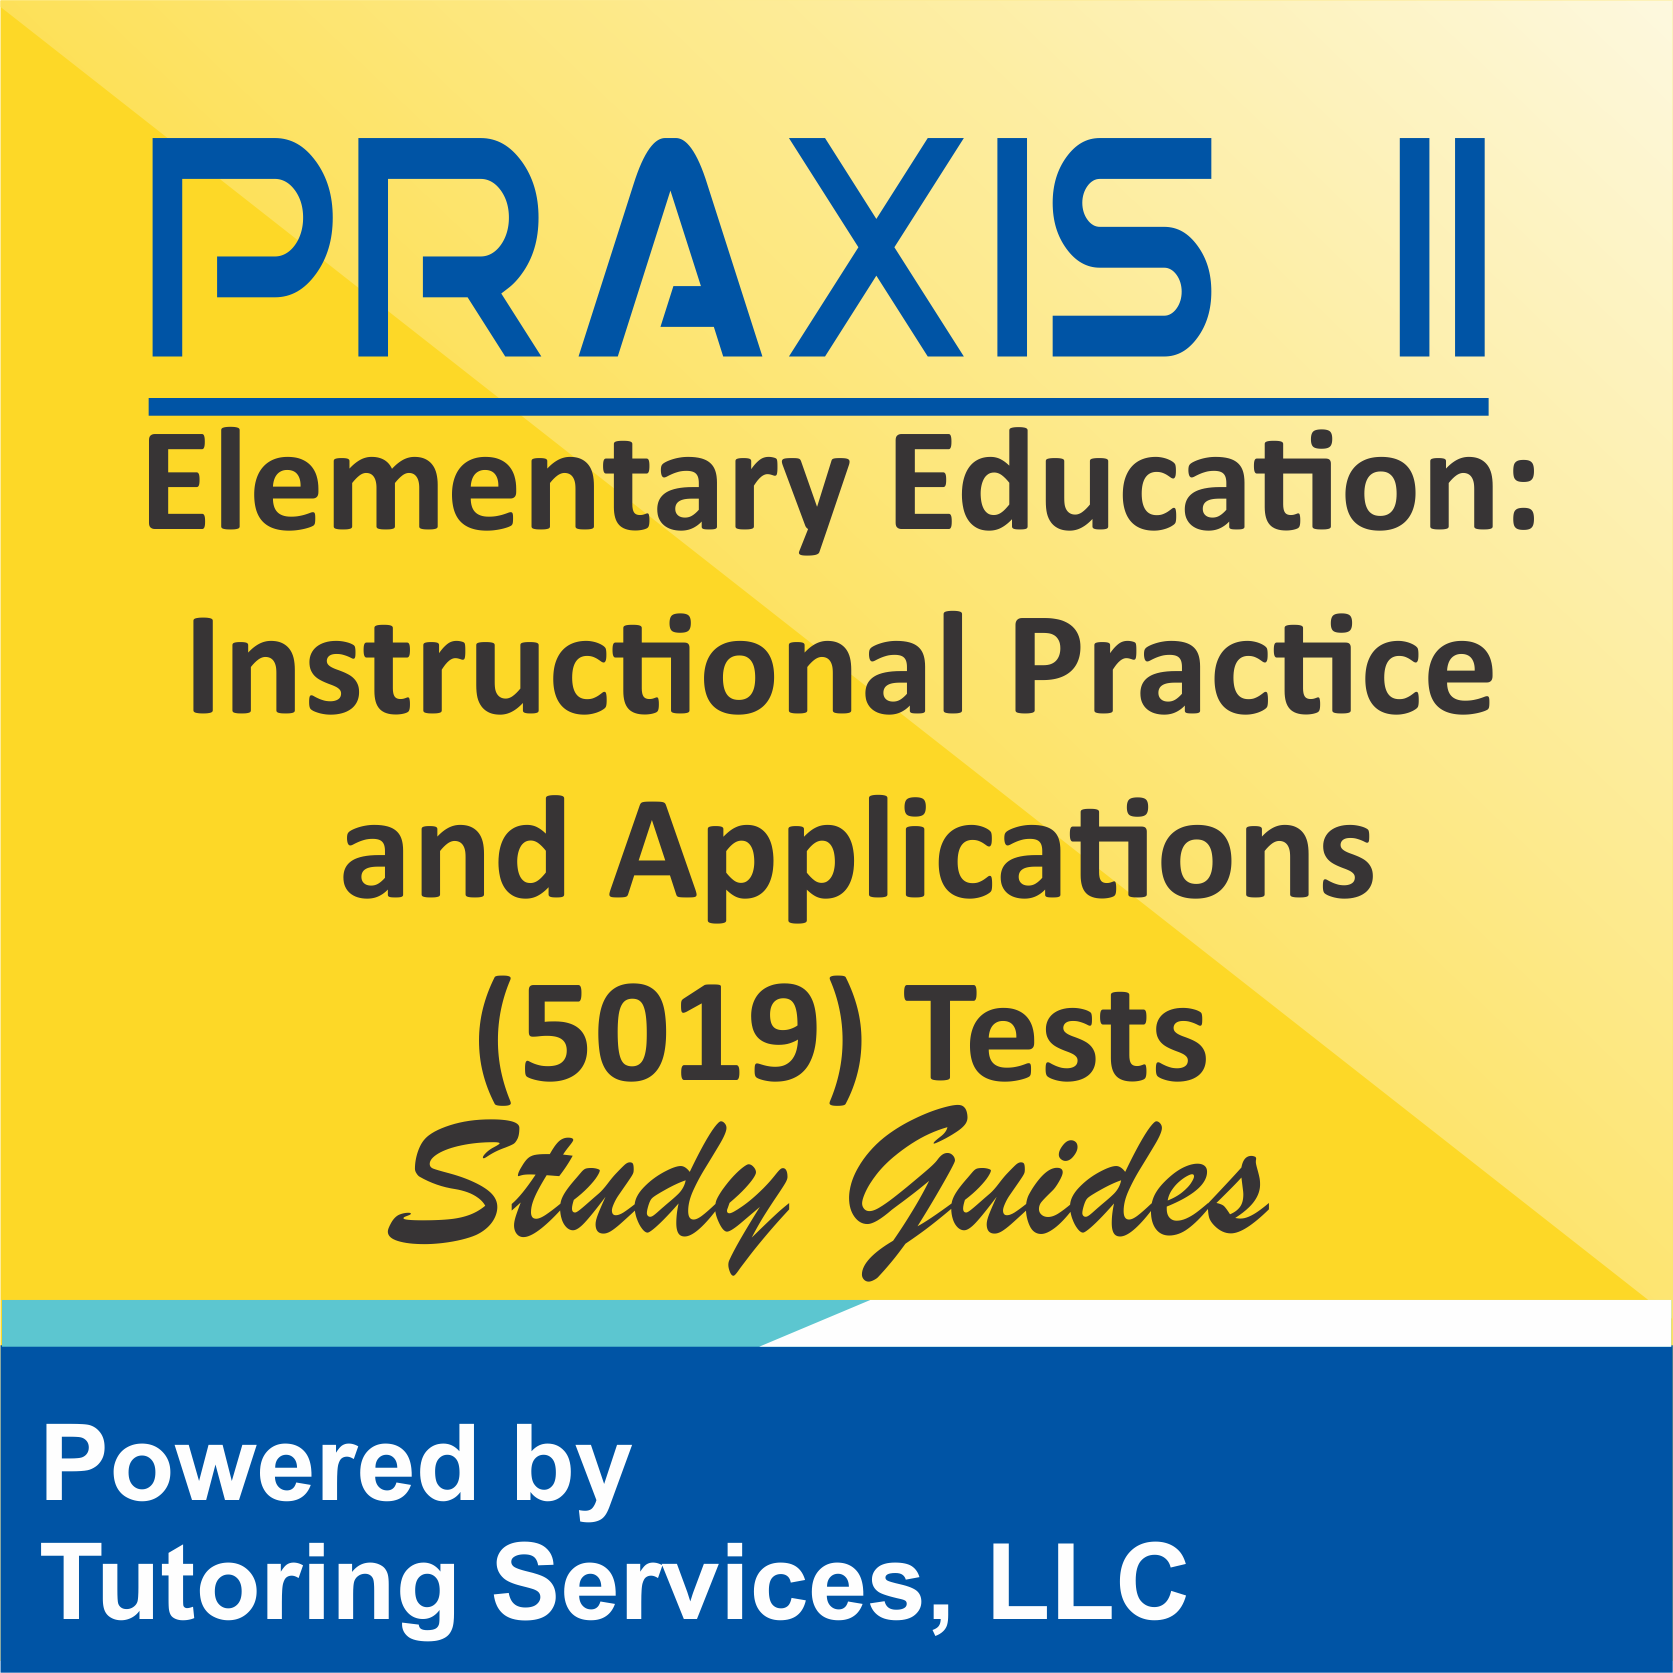 Praxis II Elementary Education: Instructional Practice and Applications (5019) Examination Format